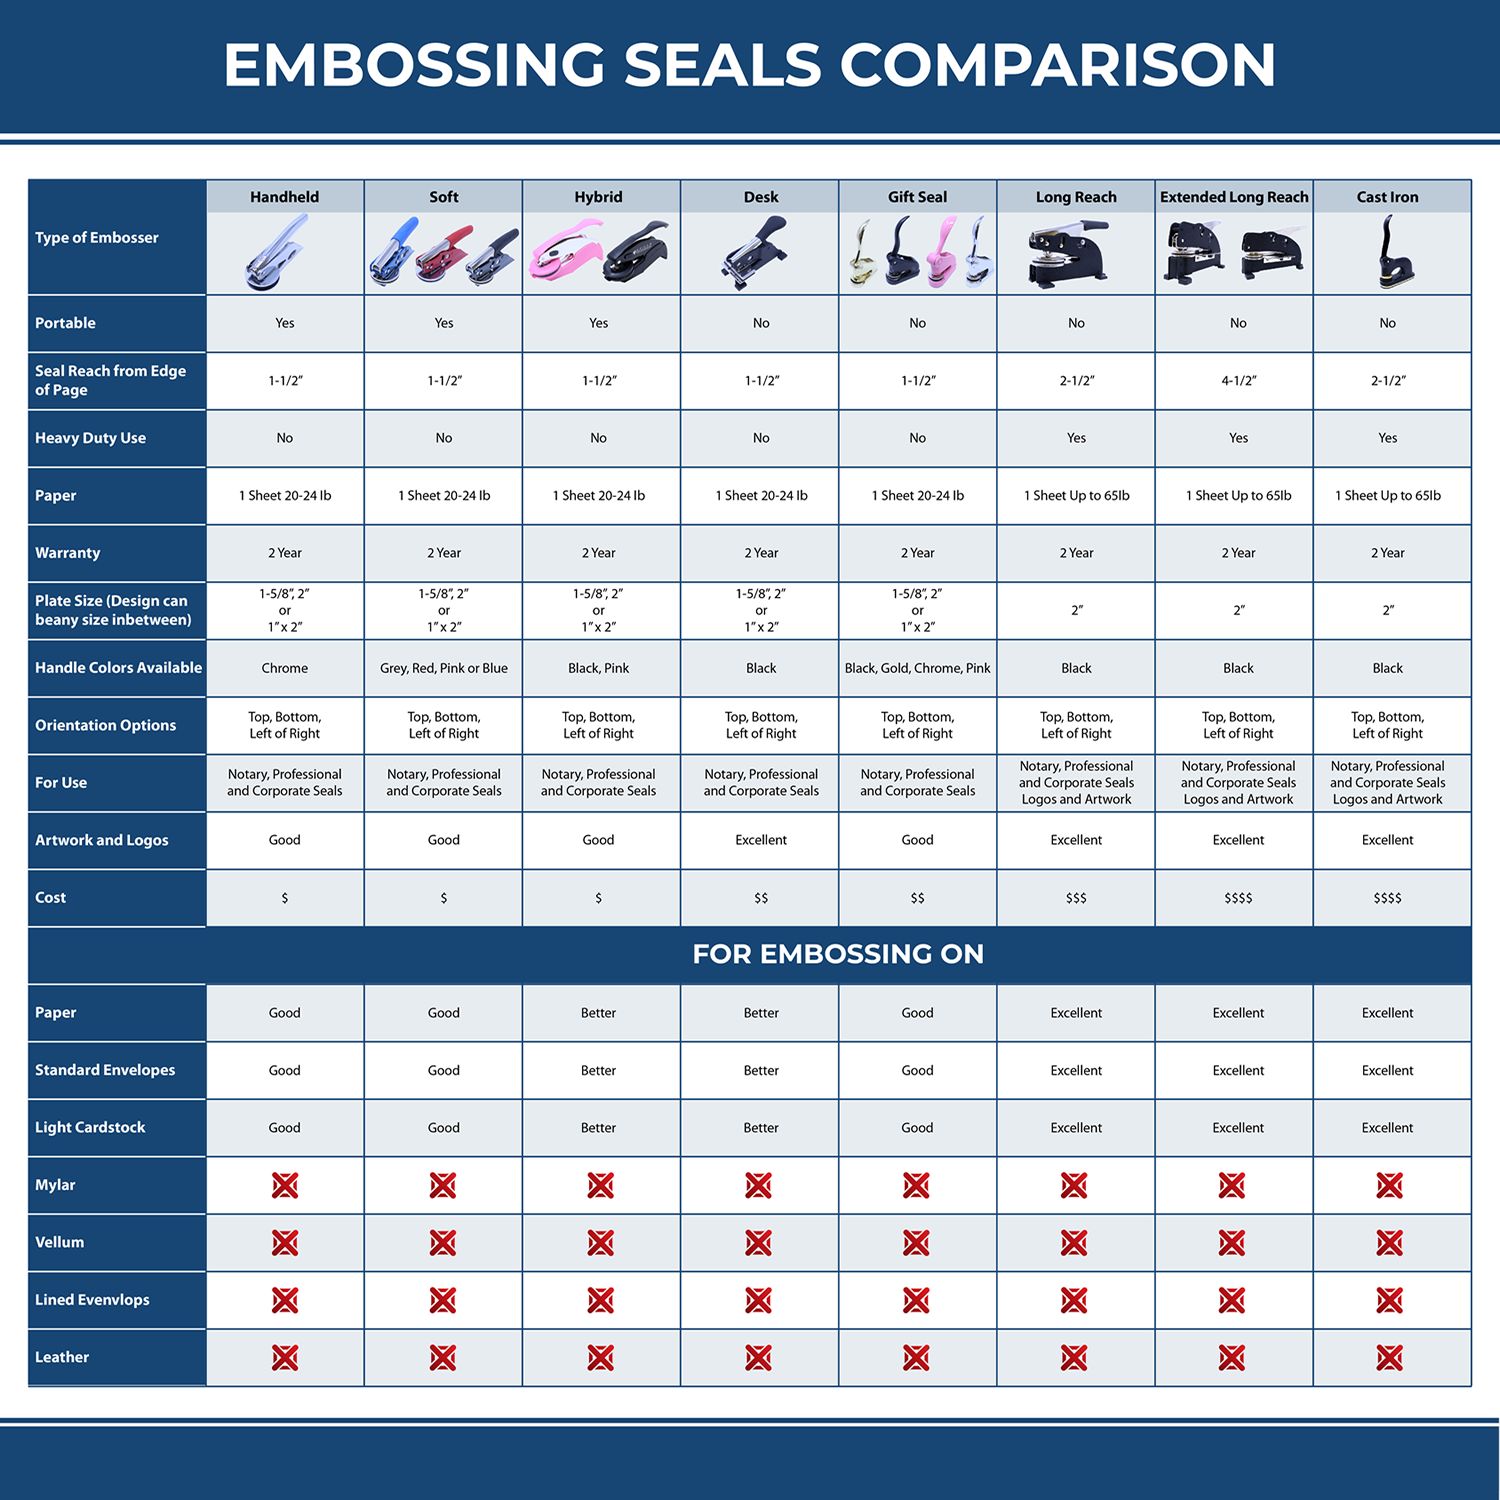 A comparison chart for the different types of mount models available for the Extended Long Reach Virginia Surveyor Embosser.